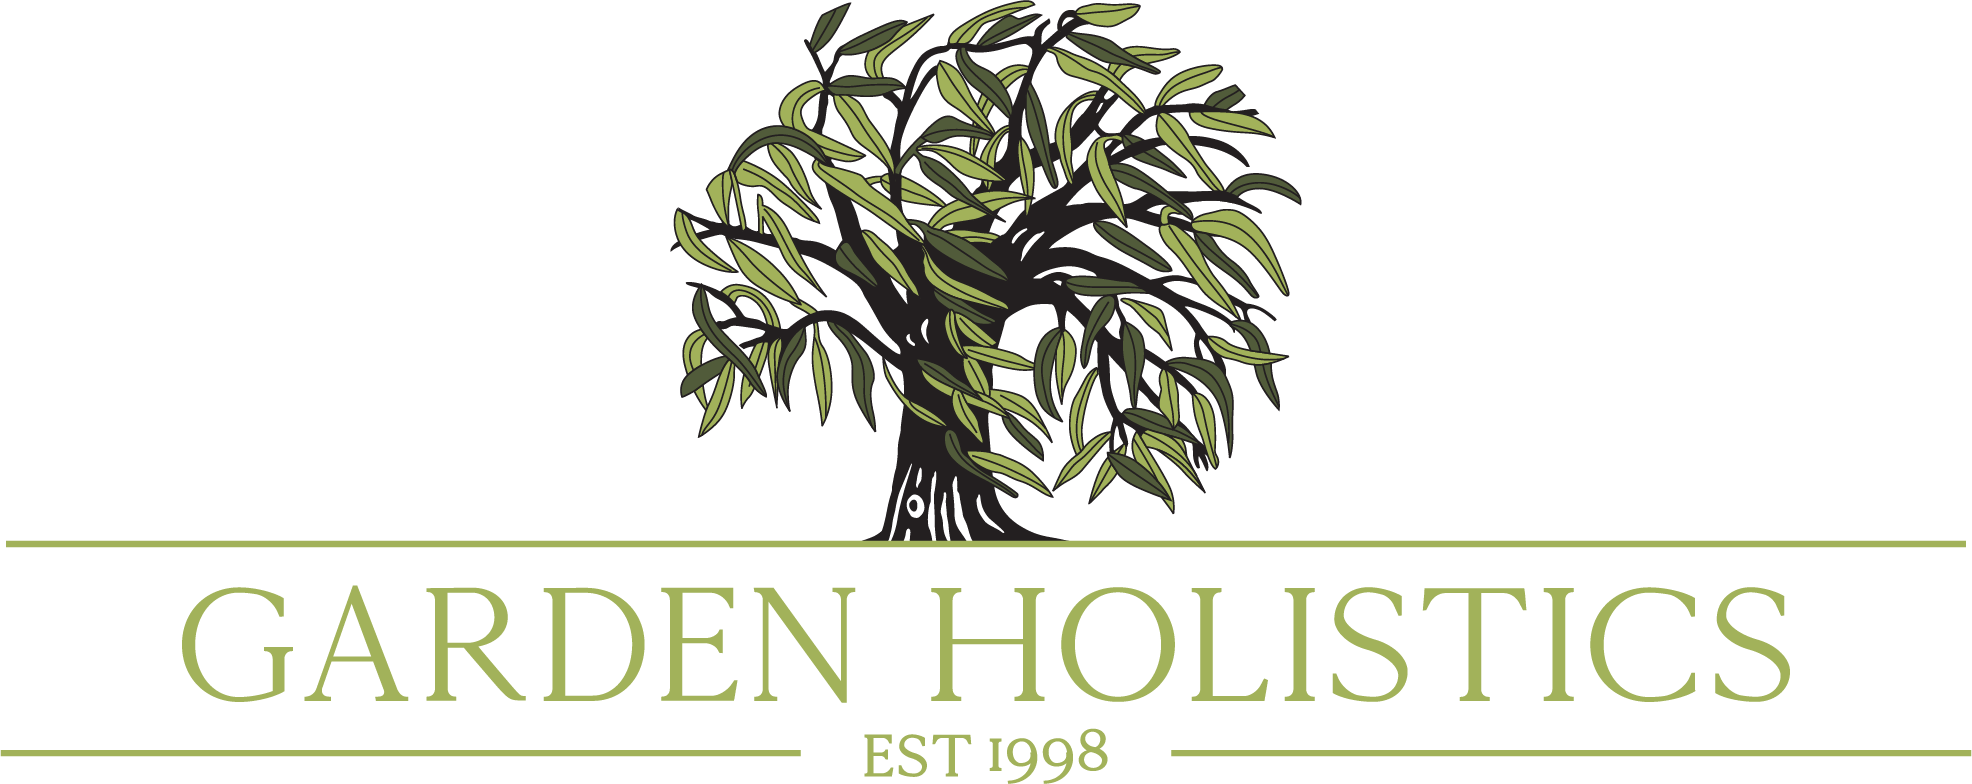 The image features a logo for "Garden Holistics" established in 1998. It includes a stylized green and yellow tree against a dark green background.